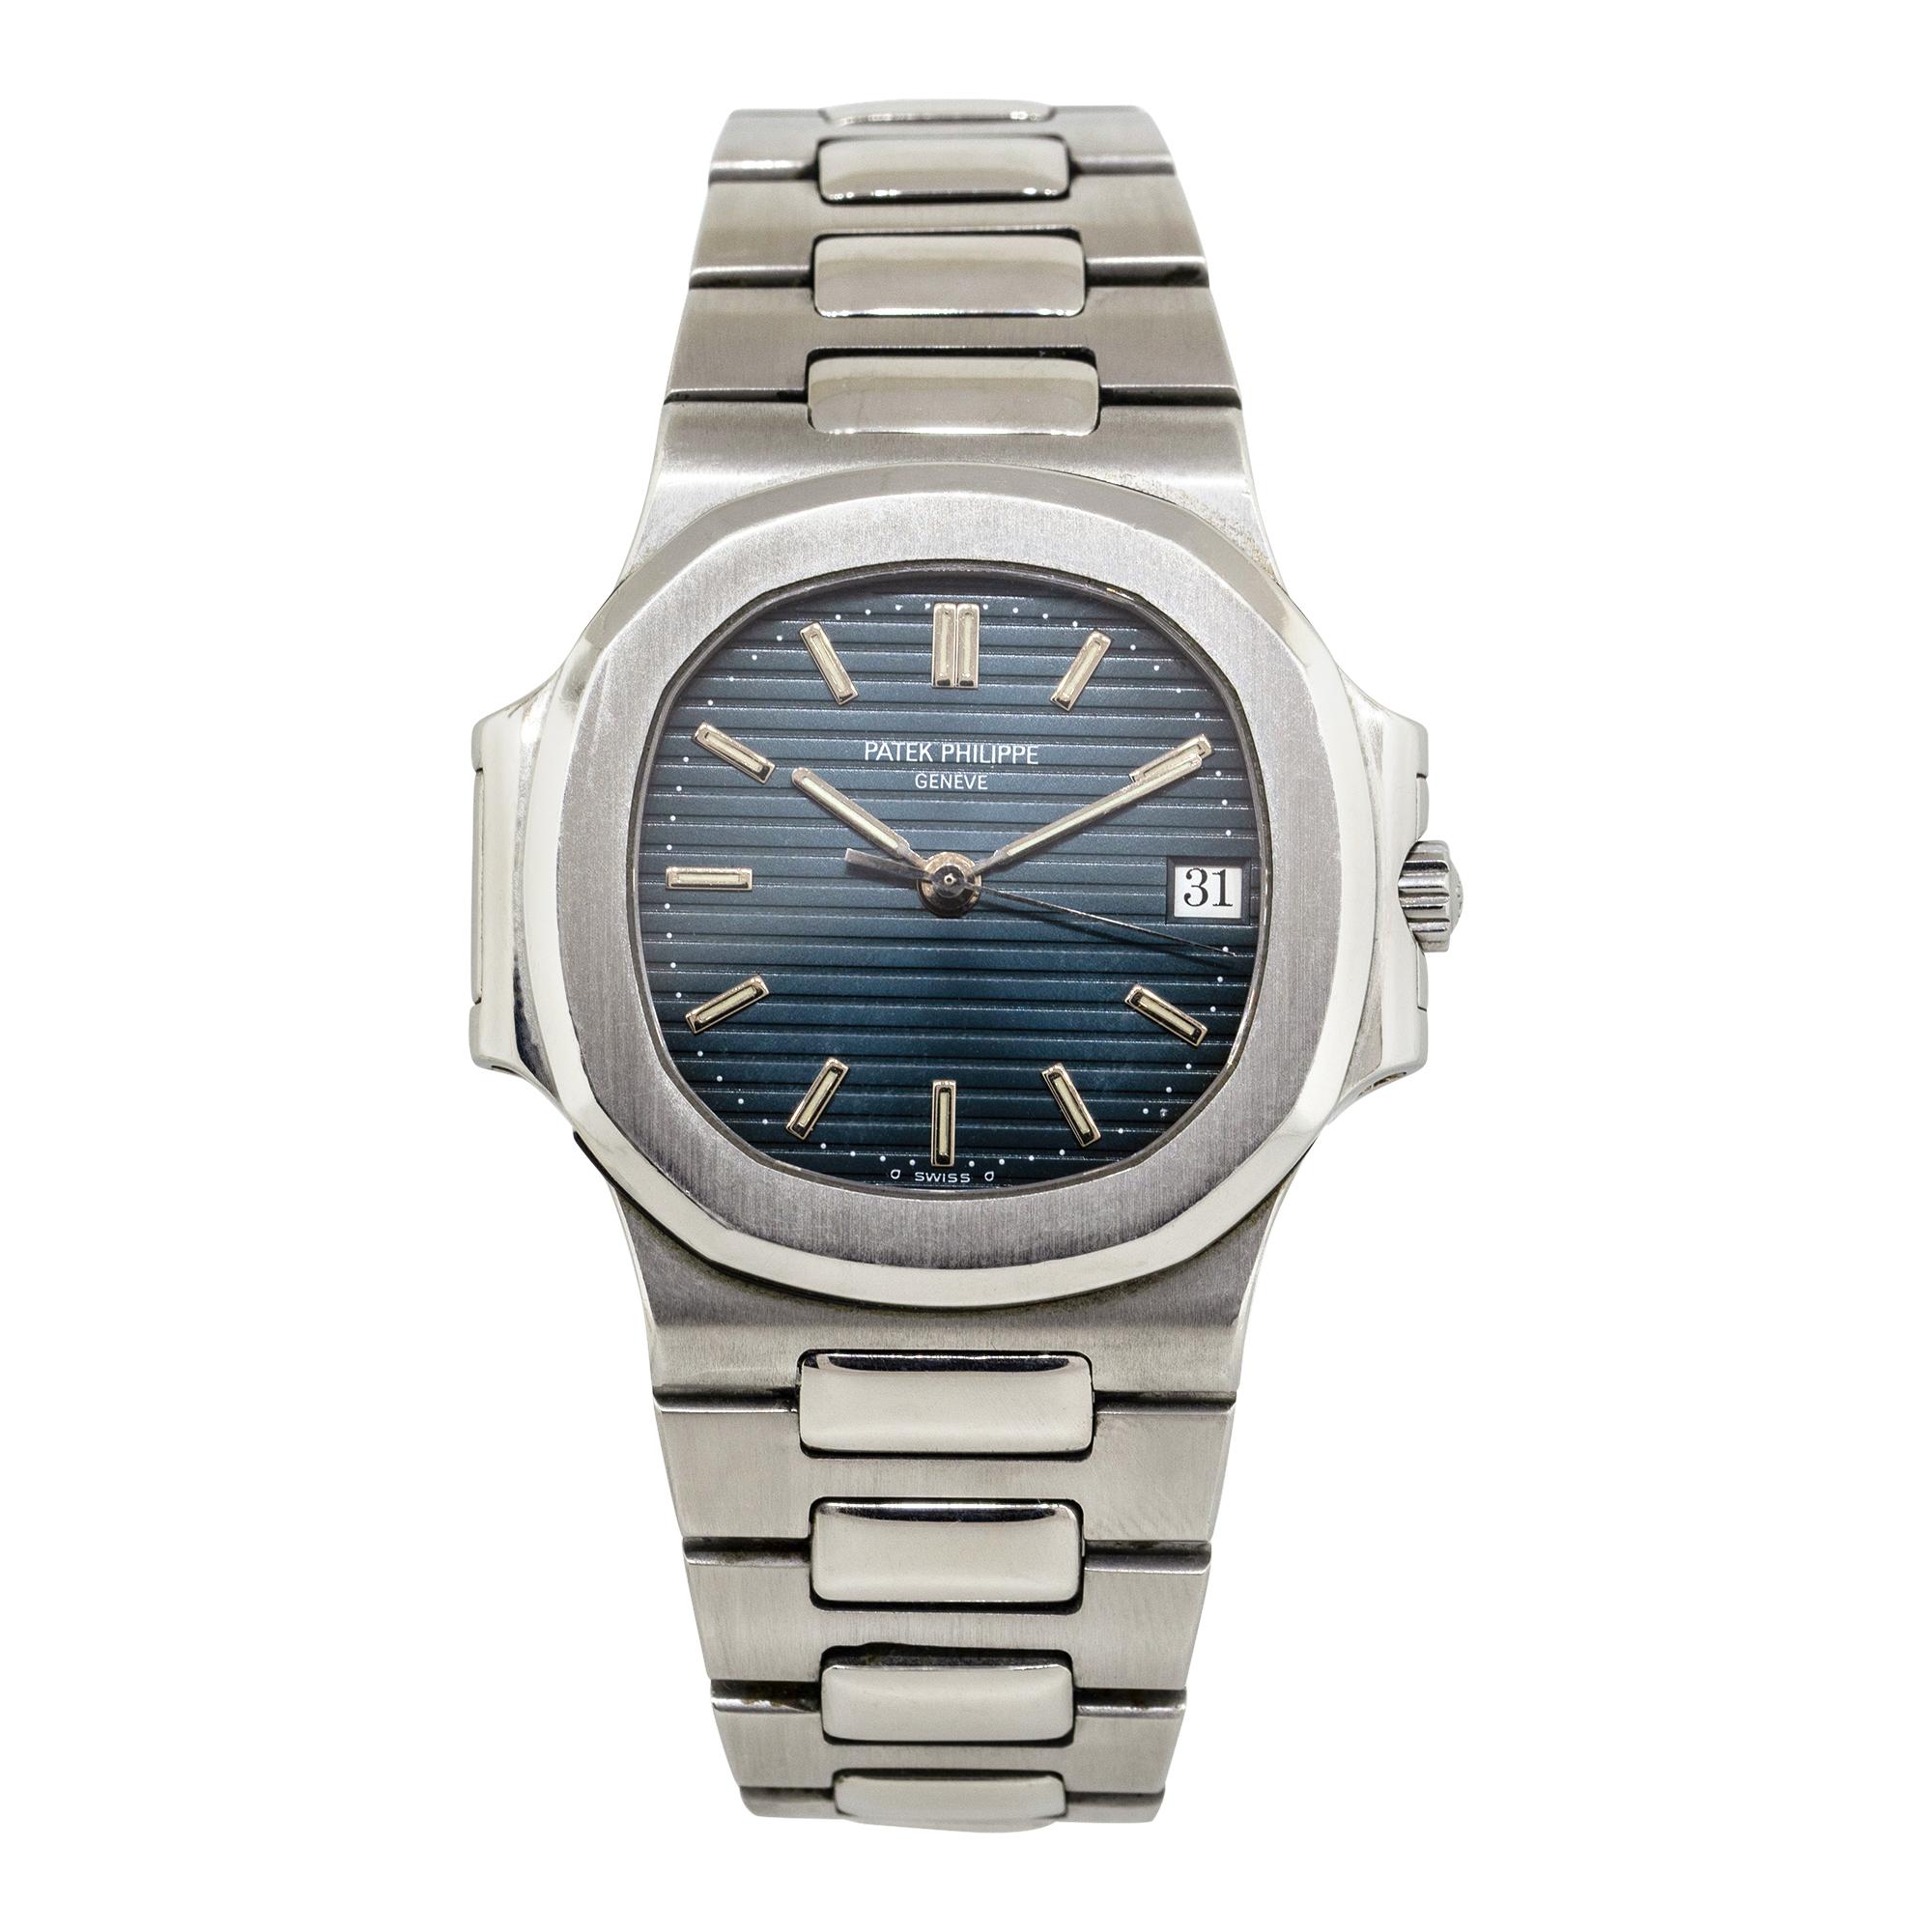 Brand: Patek Philippe
Model: 3800/001 Nautilus
Case Material: Stainless steel
Case Diameter: 37mm
Crystal: Scratch resistant sapphire
Bezel: Brushed stainless steel bezel
Dial: Blue dial with date displayed at 3 o’clock
Bracelet: Stainless